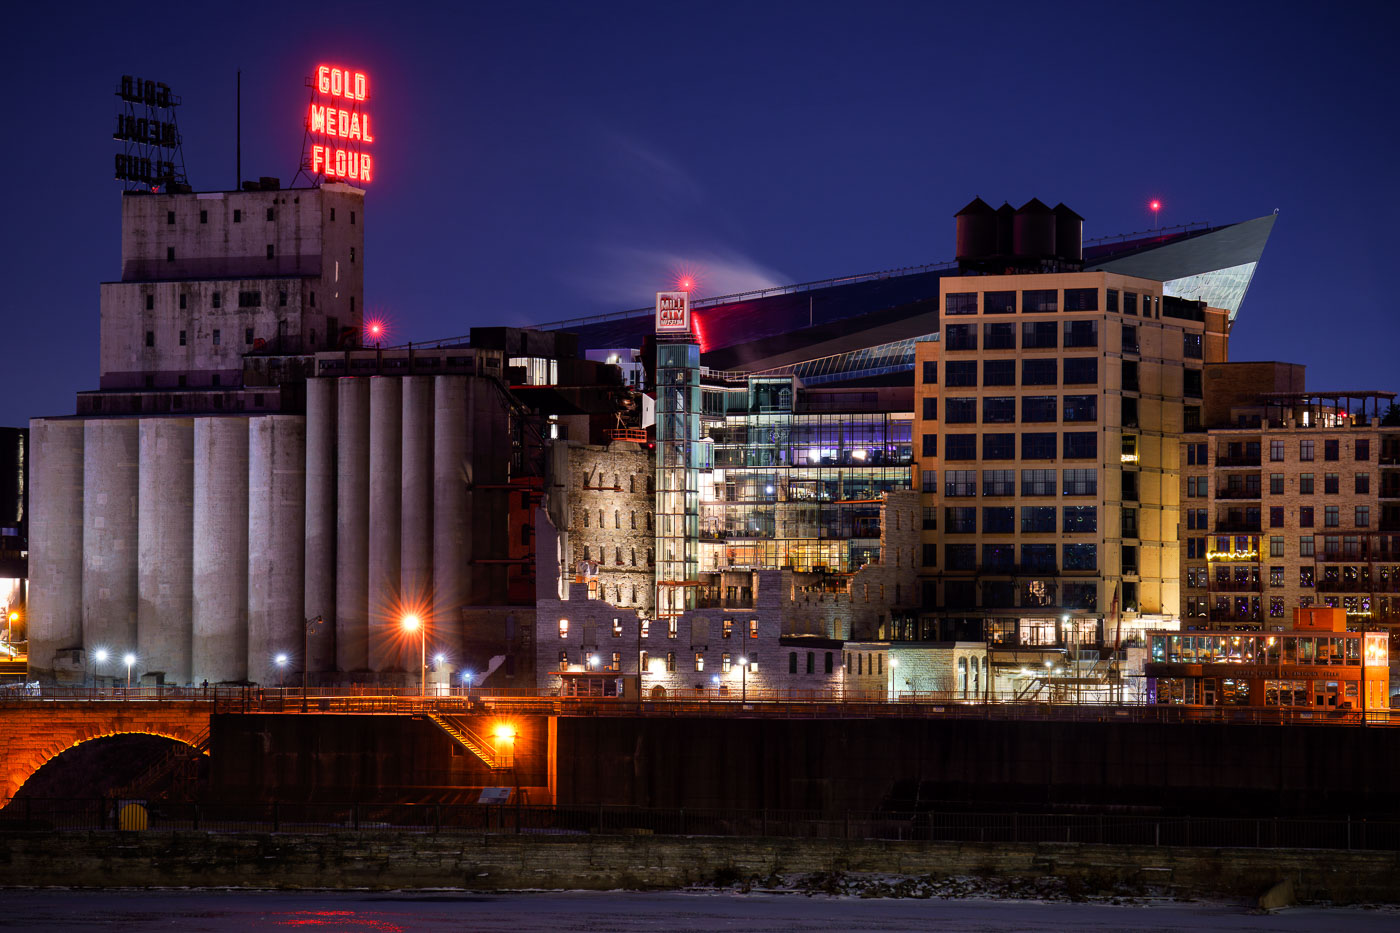 US Bank Stadium and Mill City Museum neon signs